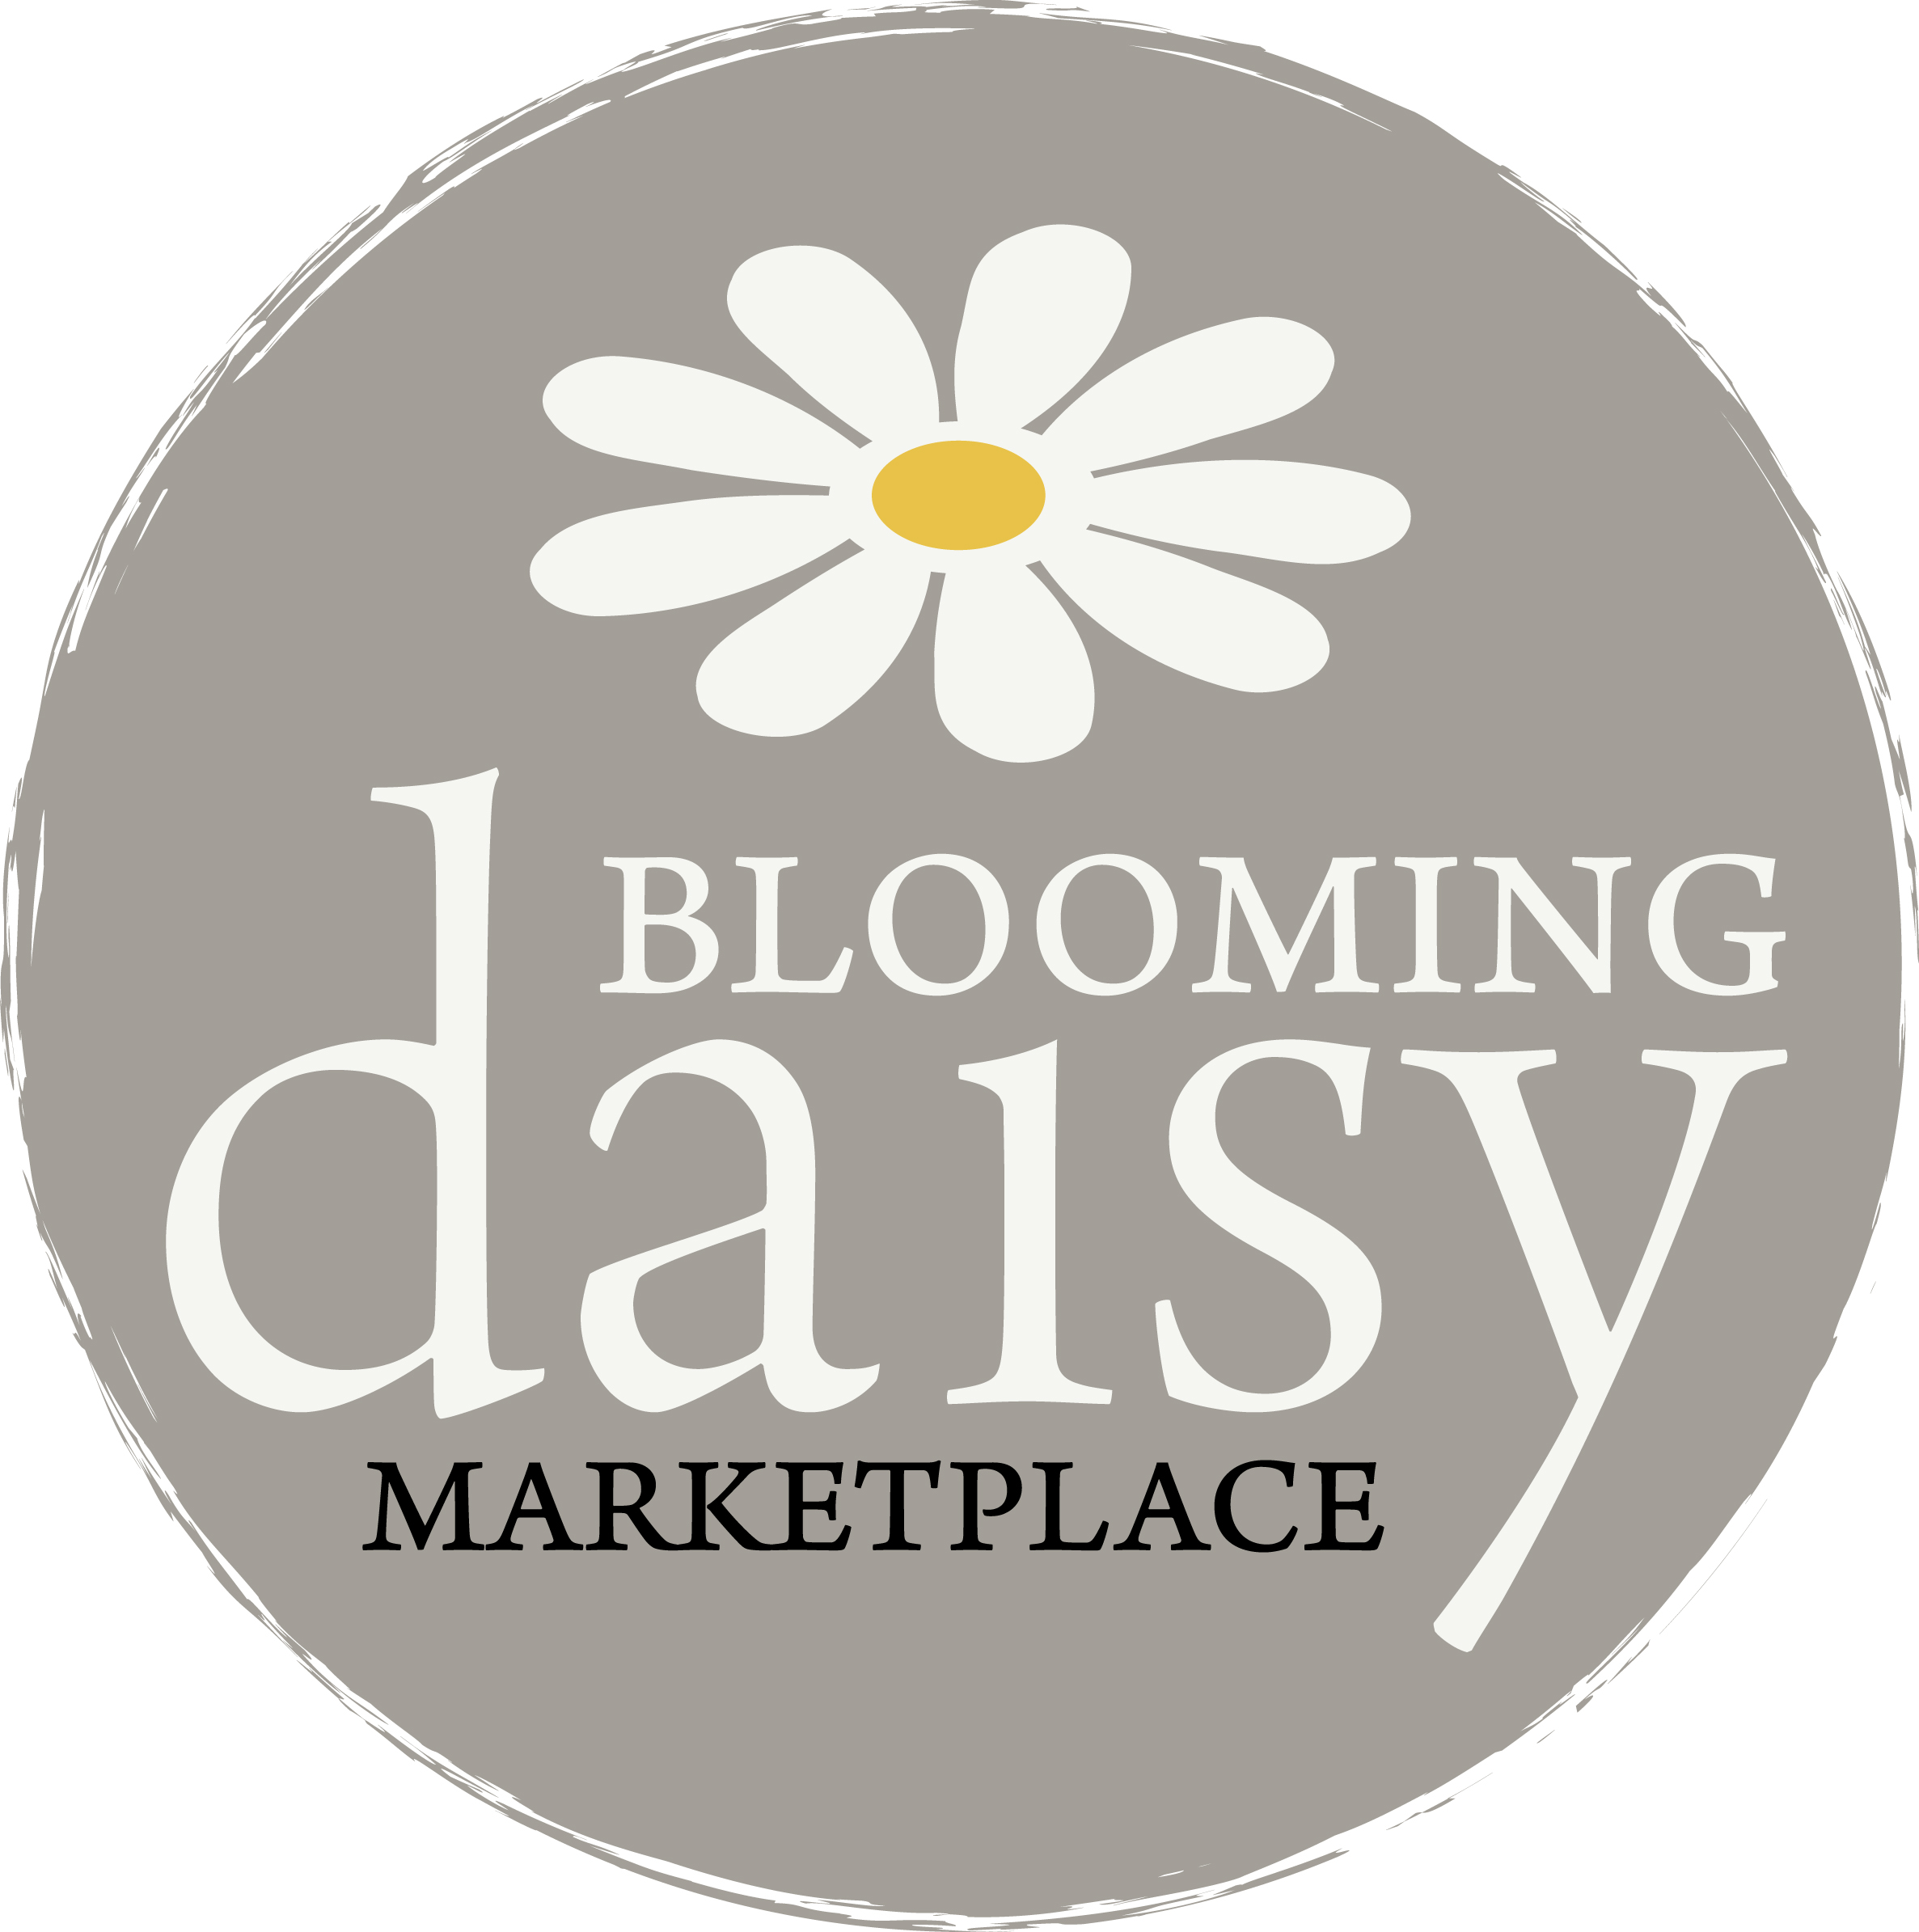 Blooming Daisy Marketplace